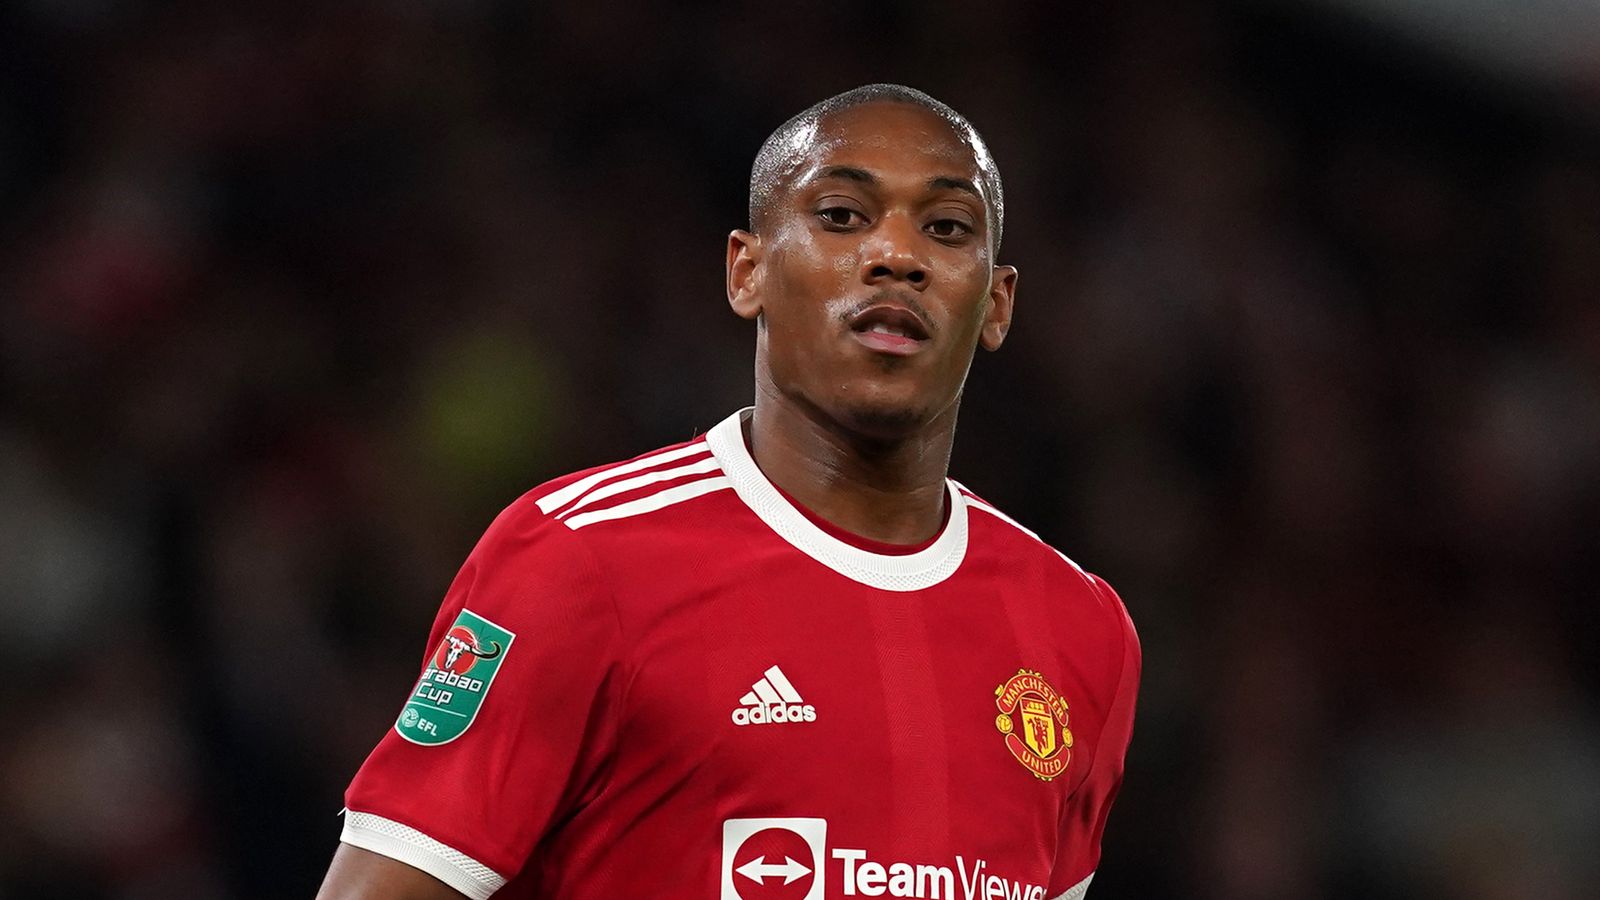 Anthony Martial tells Manchester United interim manager Ralf Rangnick he wants to leave Old Trafford